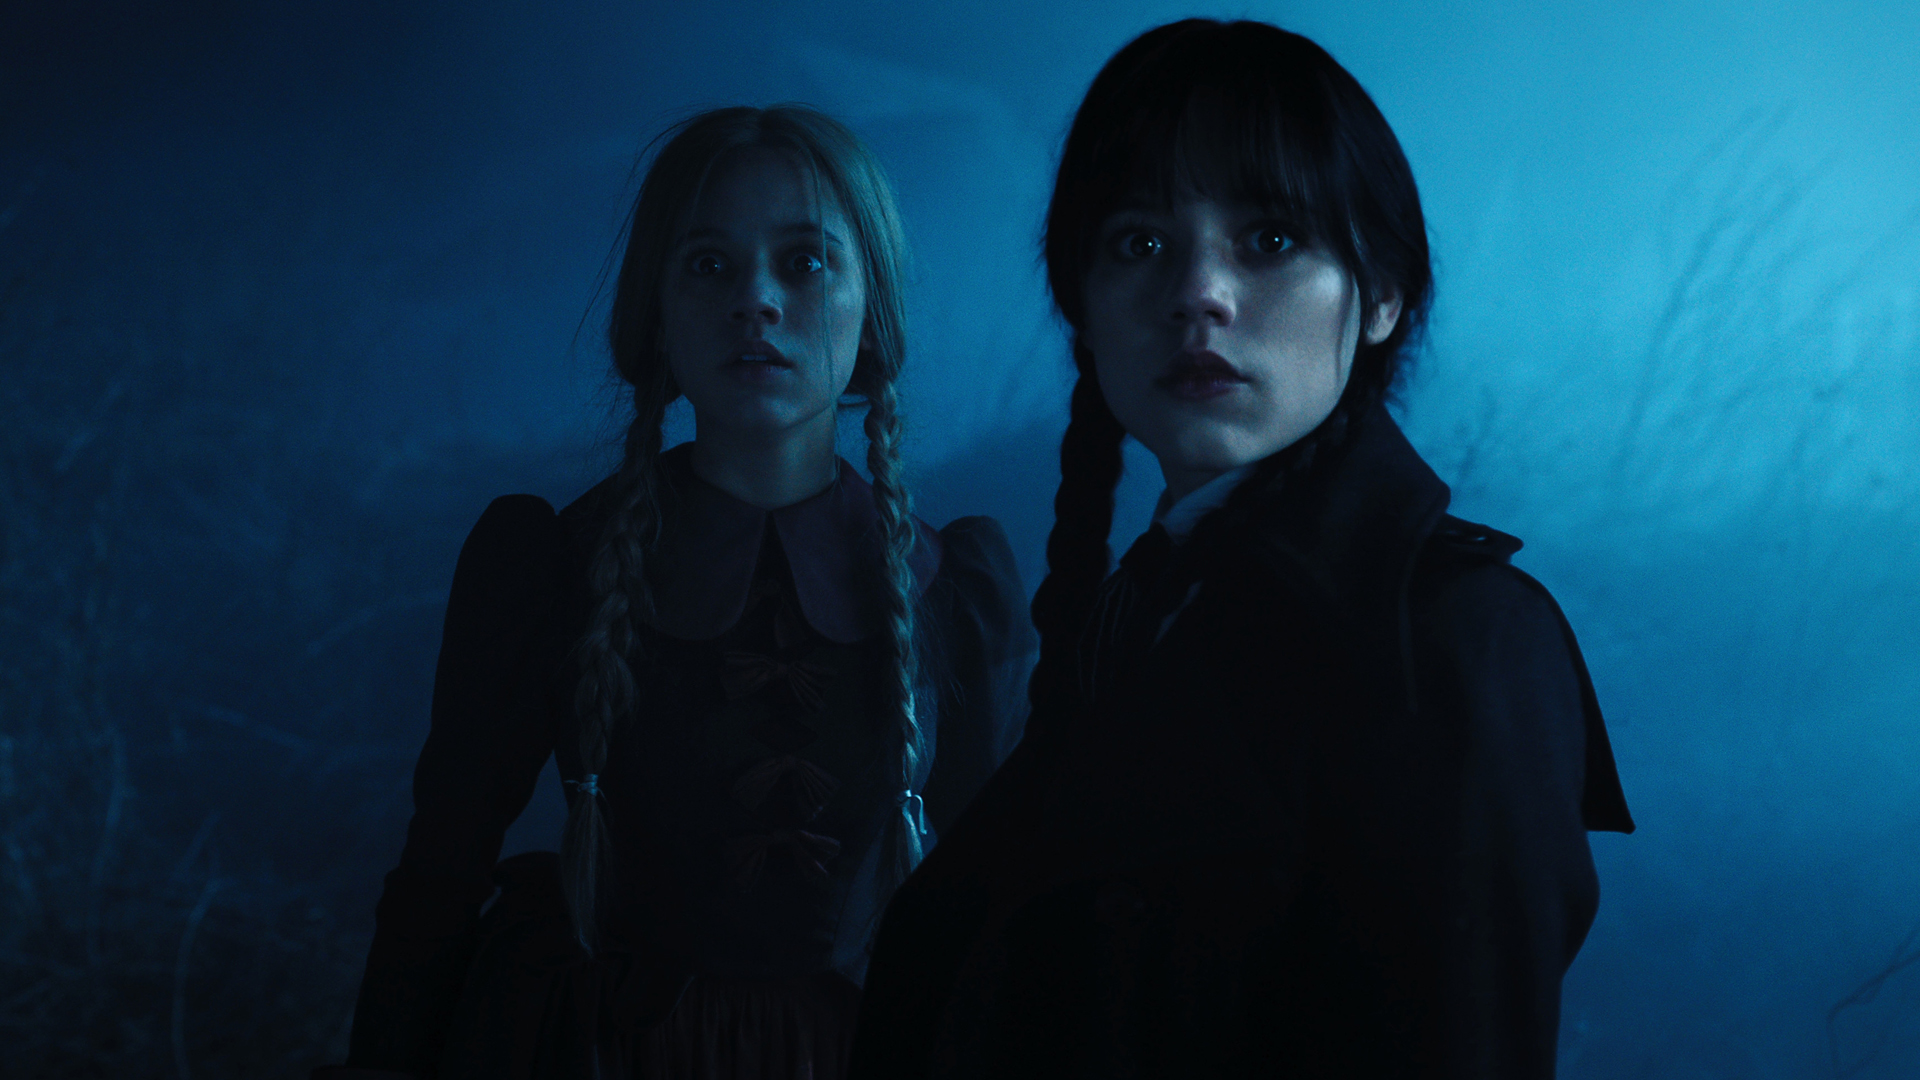 Goody Adams and Wednesday Addams stare at something off-screen in Wednesday season 1